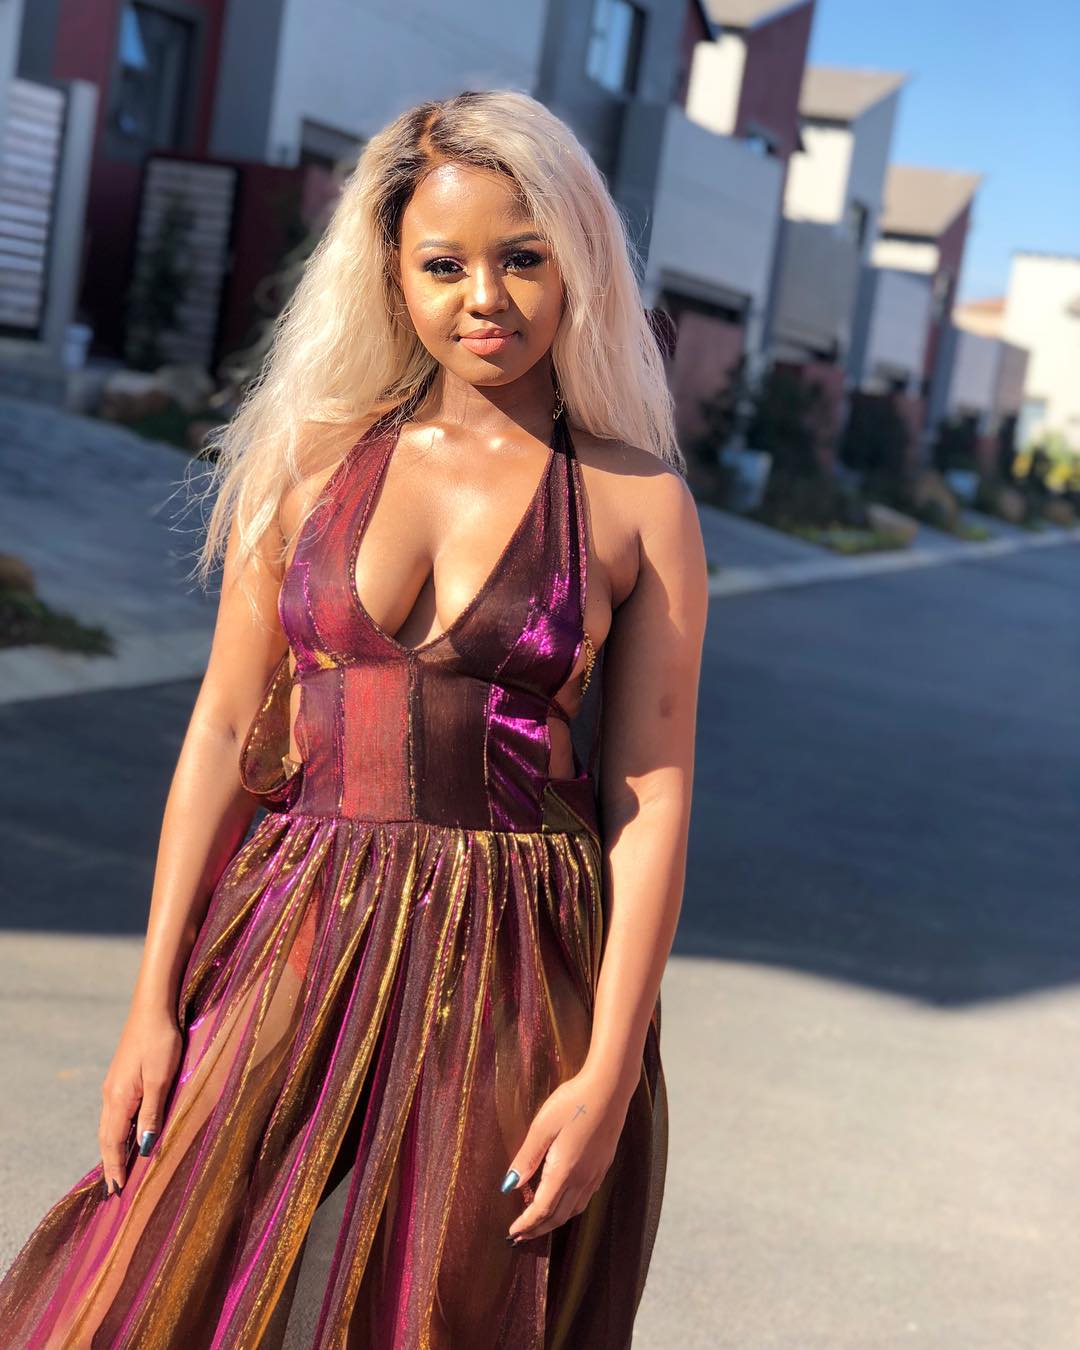 Babes Wodumo flaunts significant goods in a sheer dress. 